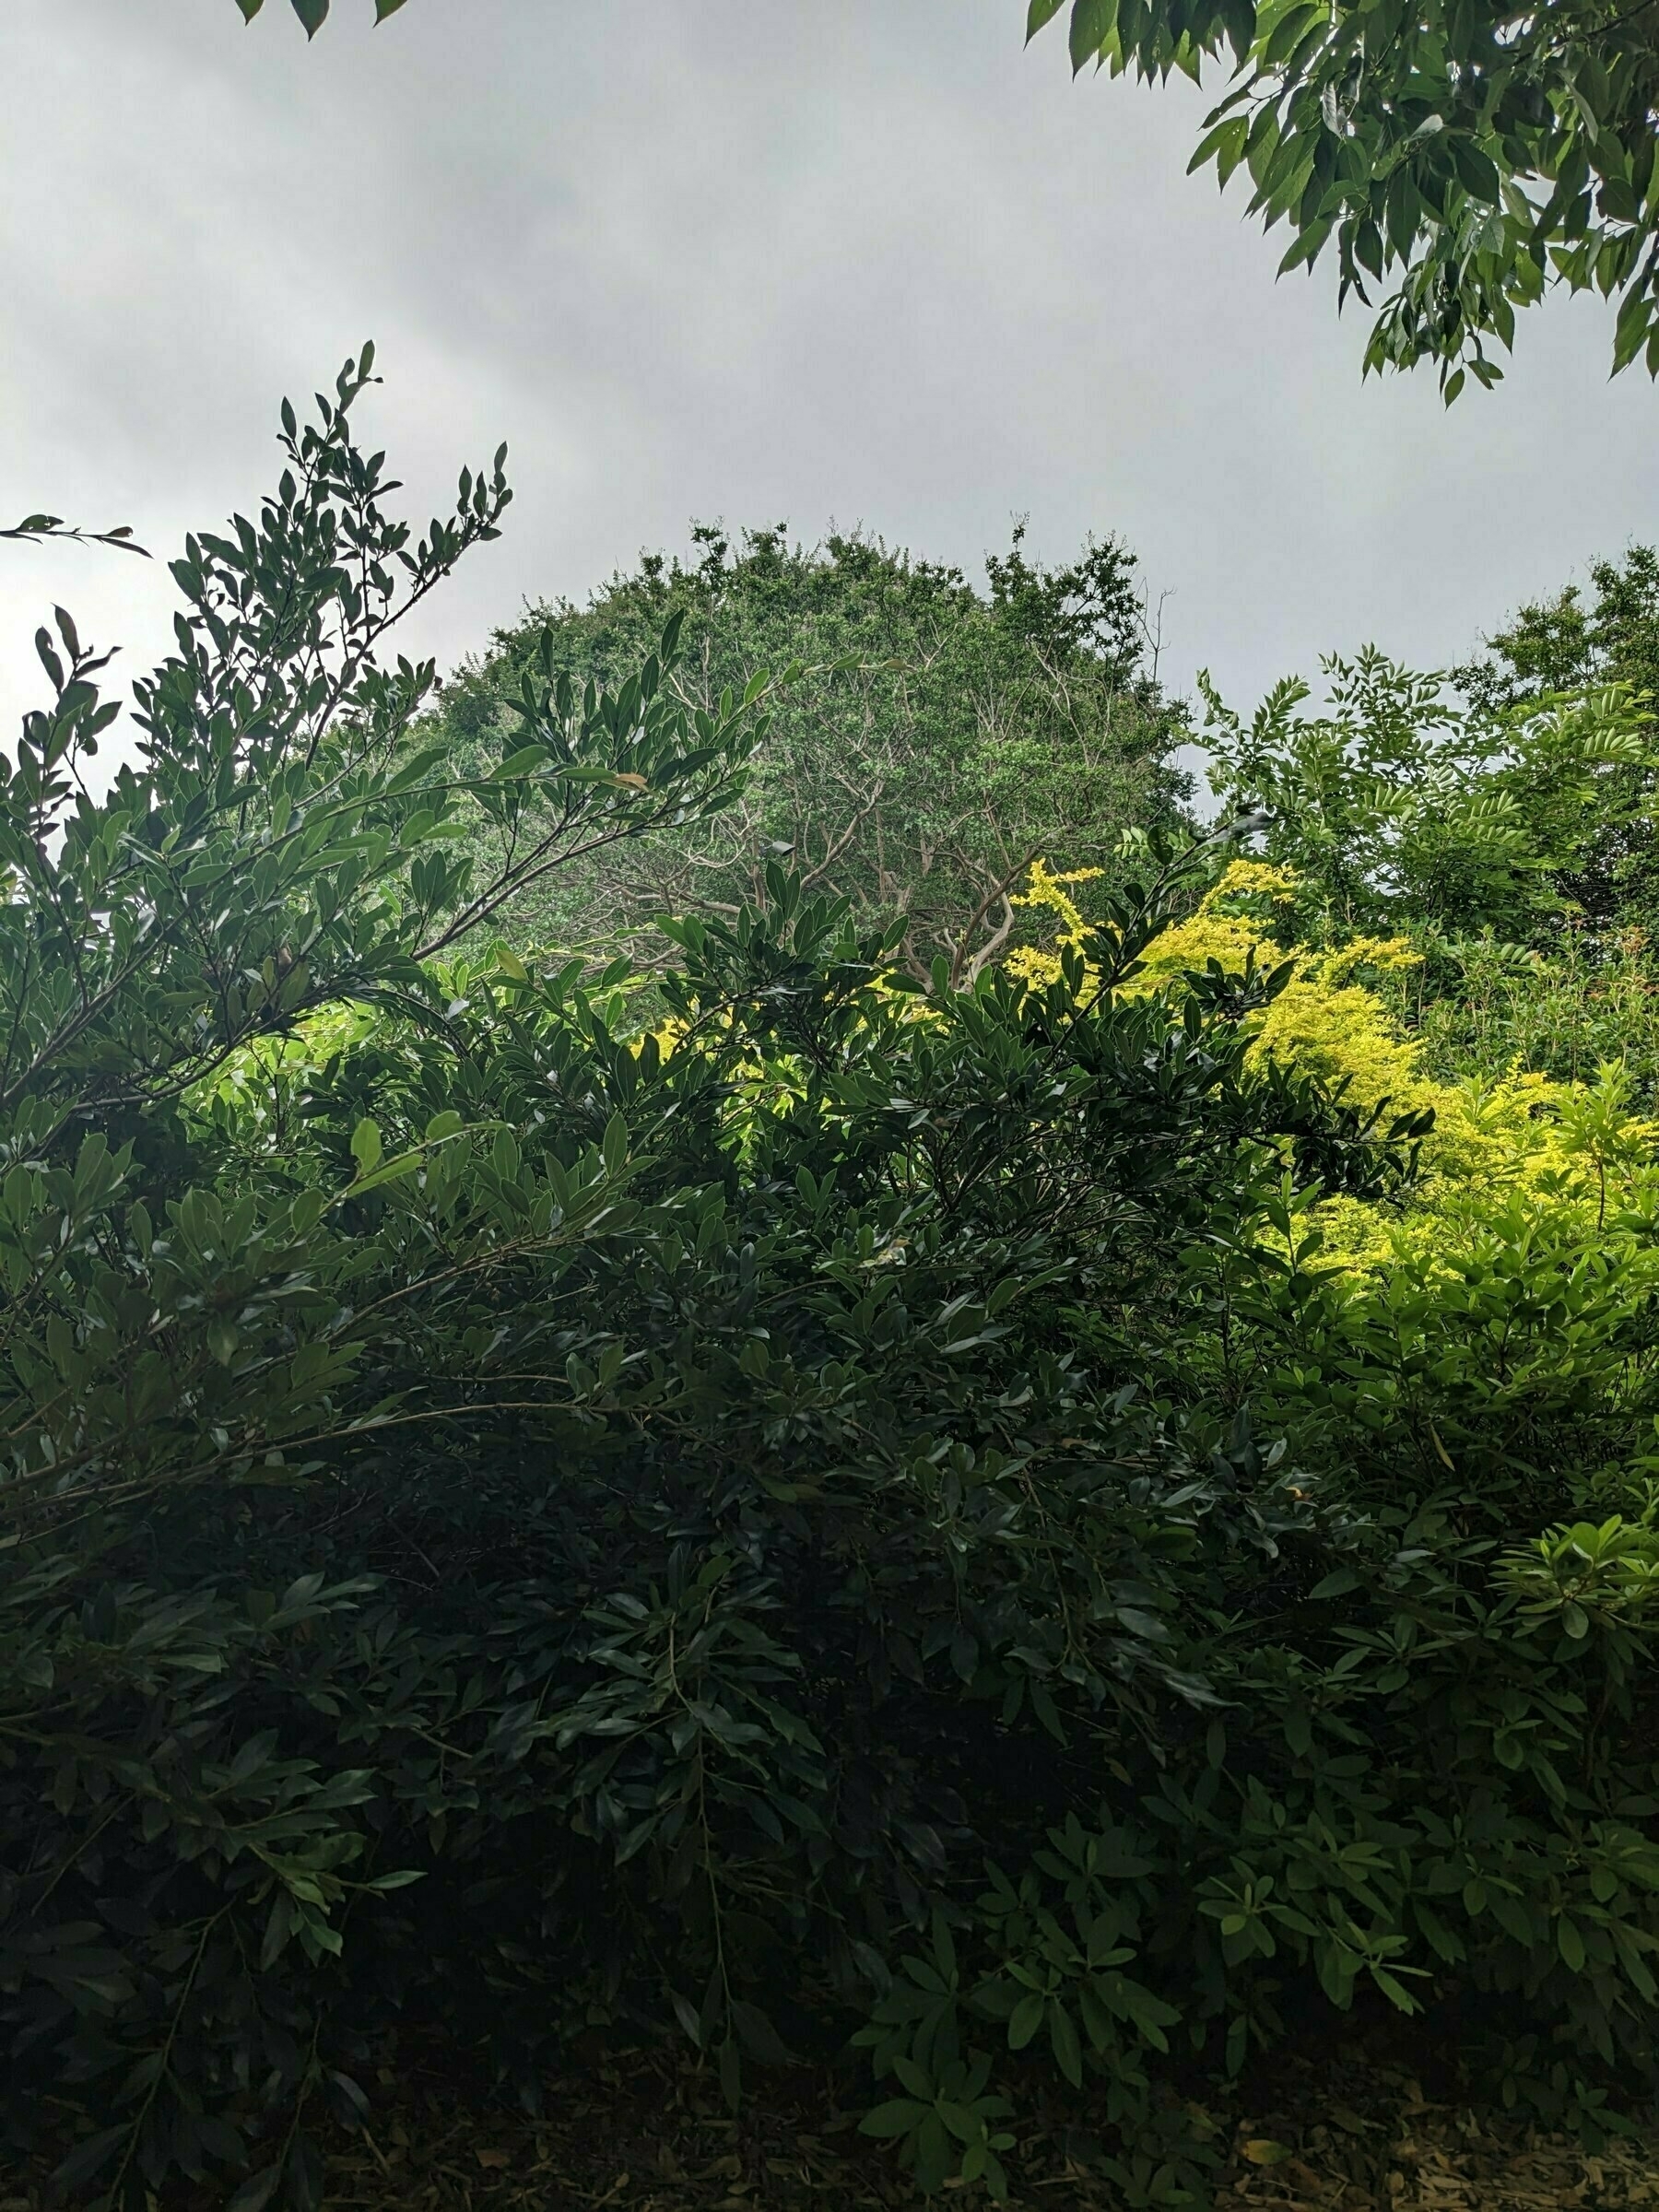 green bushes and a stormy sky